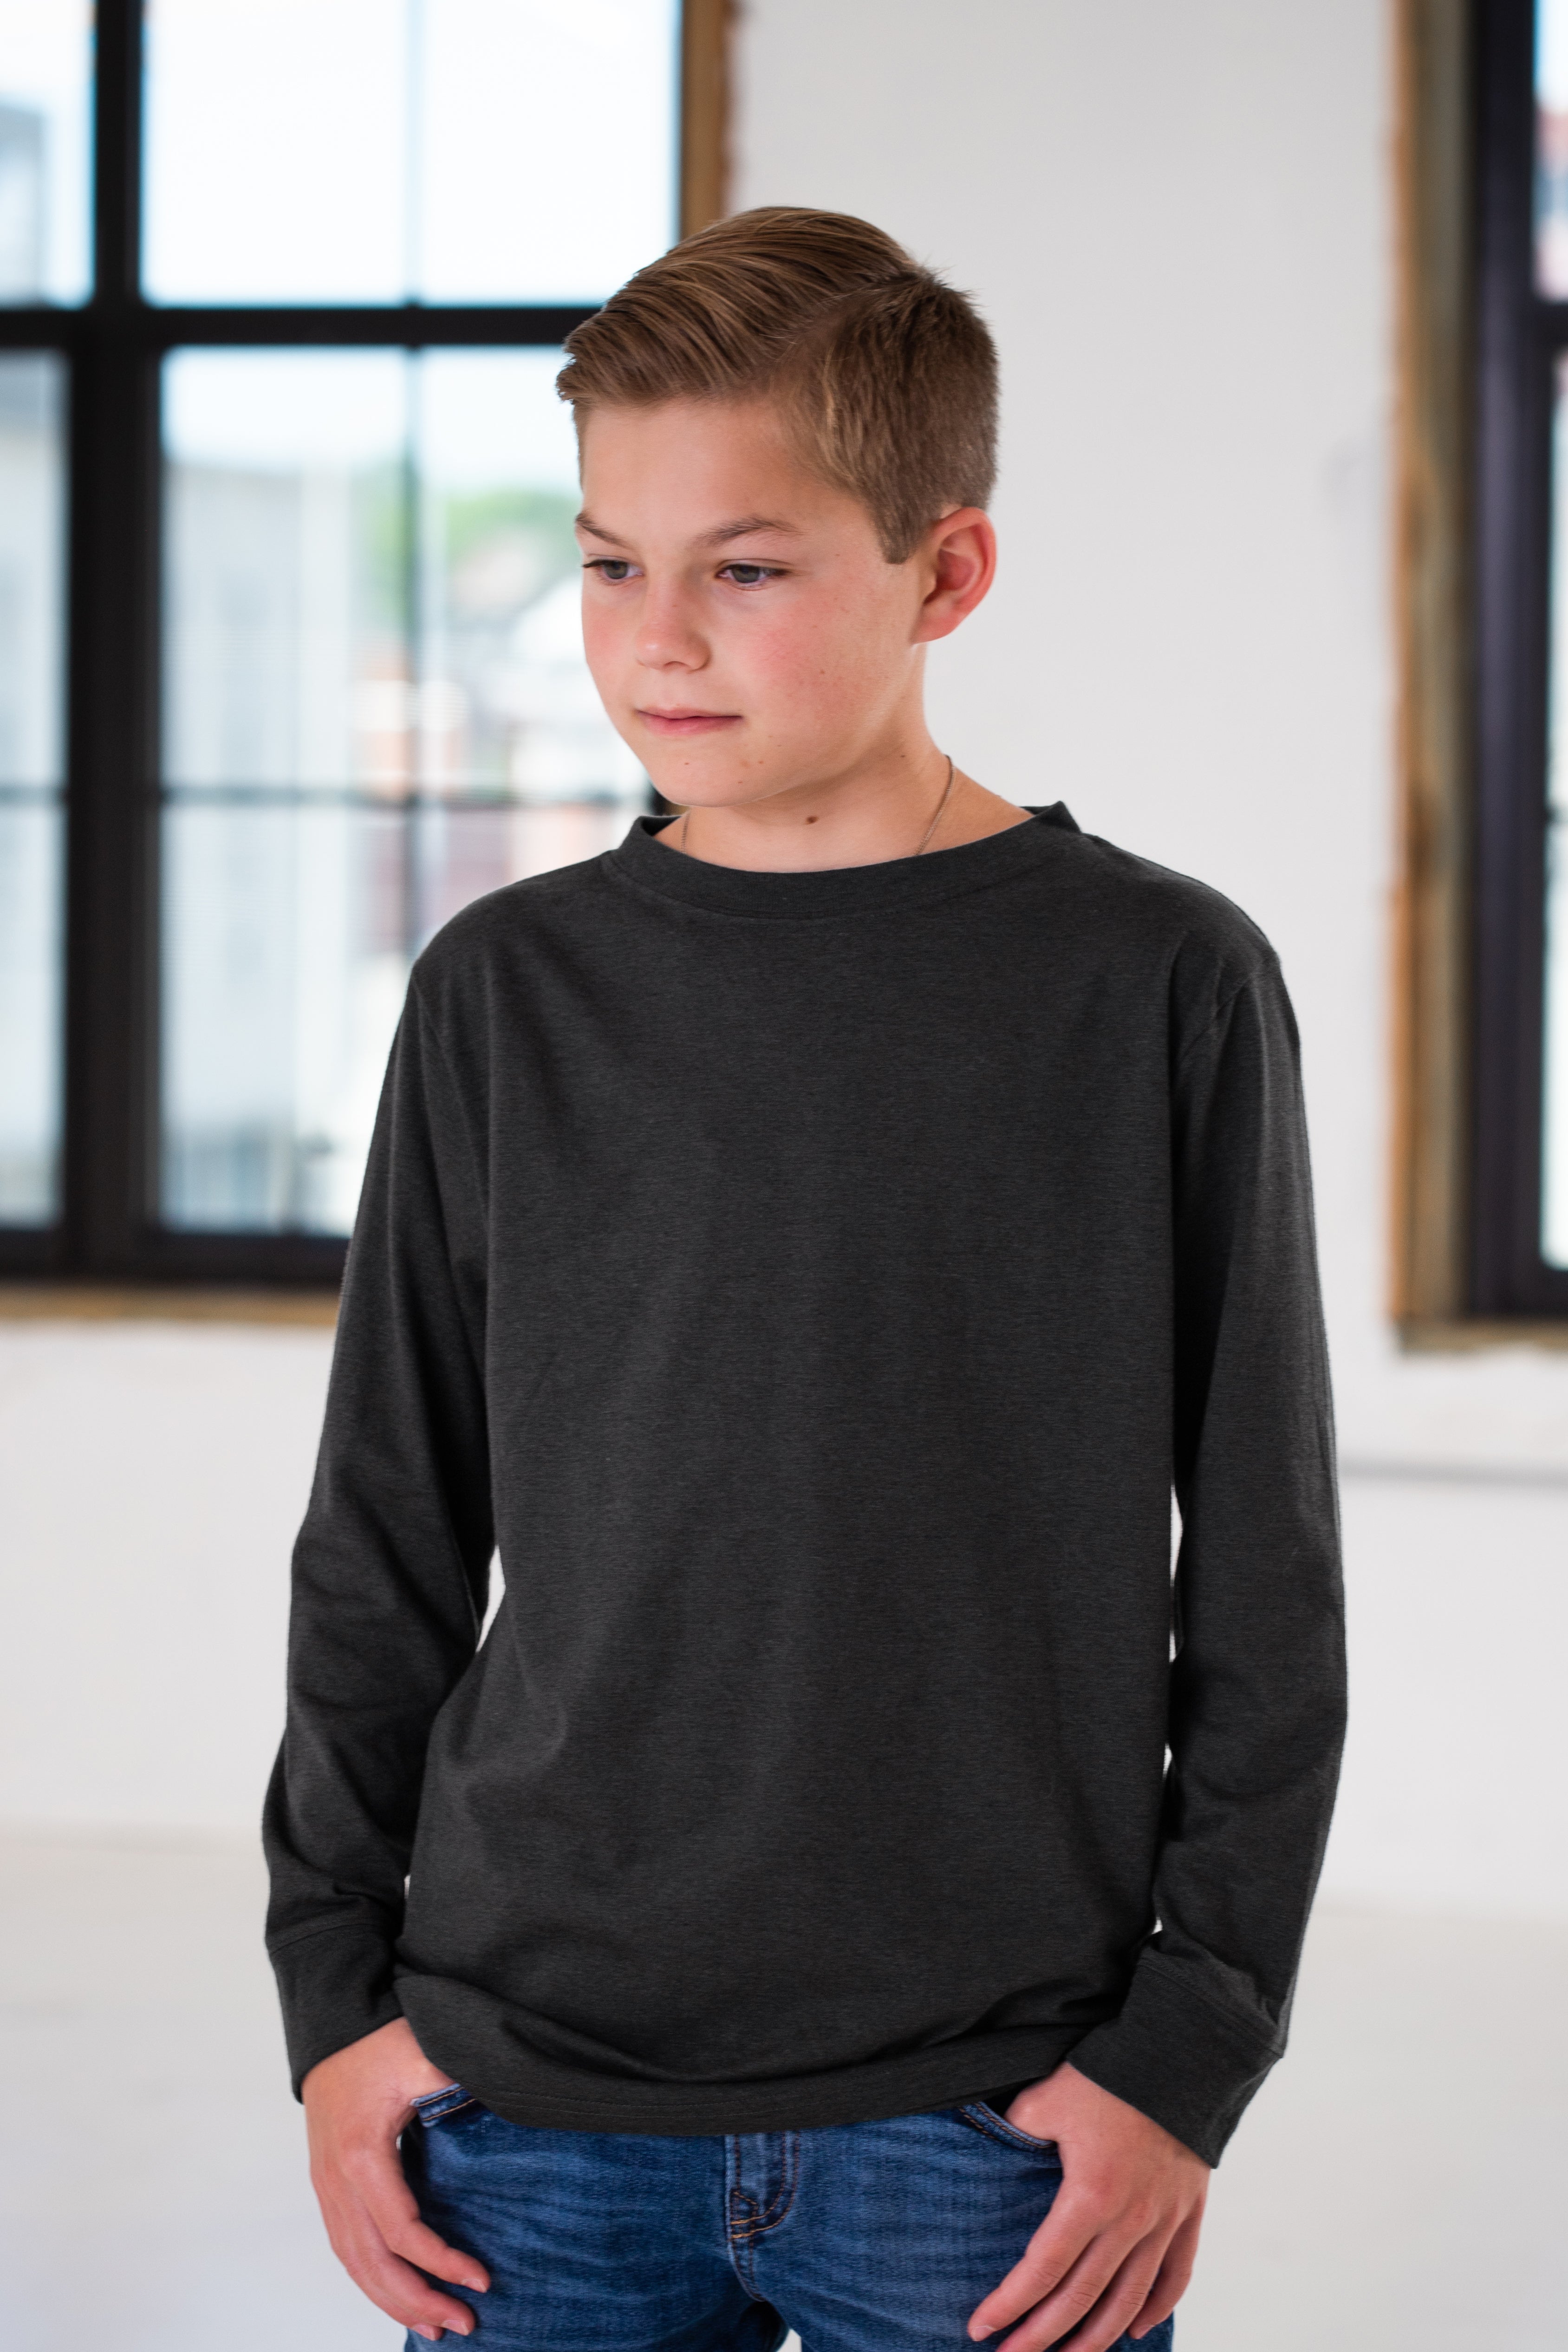 Boy Model wearing GOEX Youth Eco Triblend Long Sleeve Tee in Charcoal